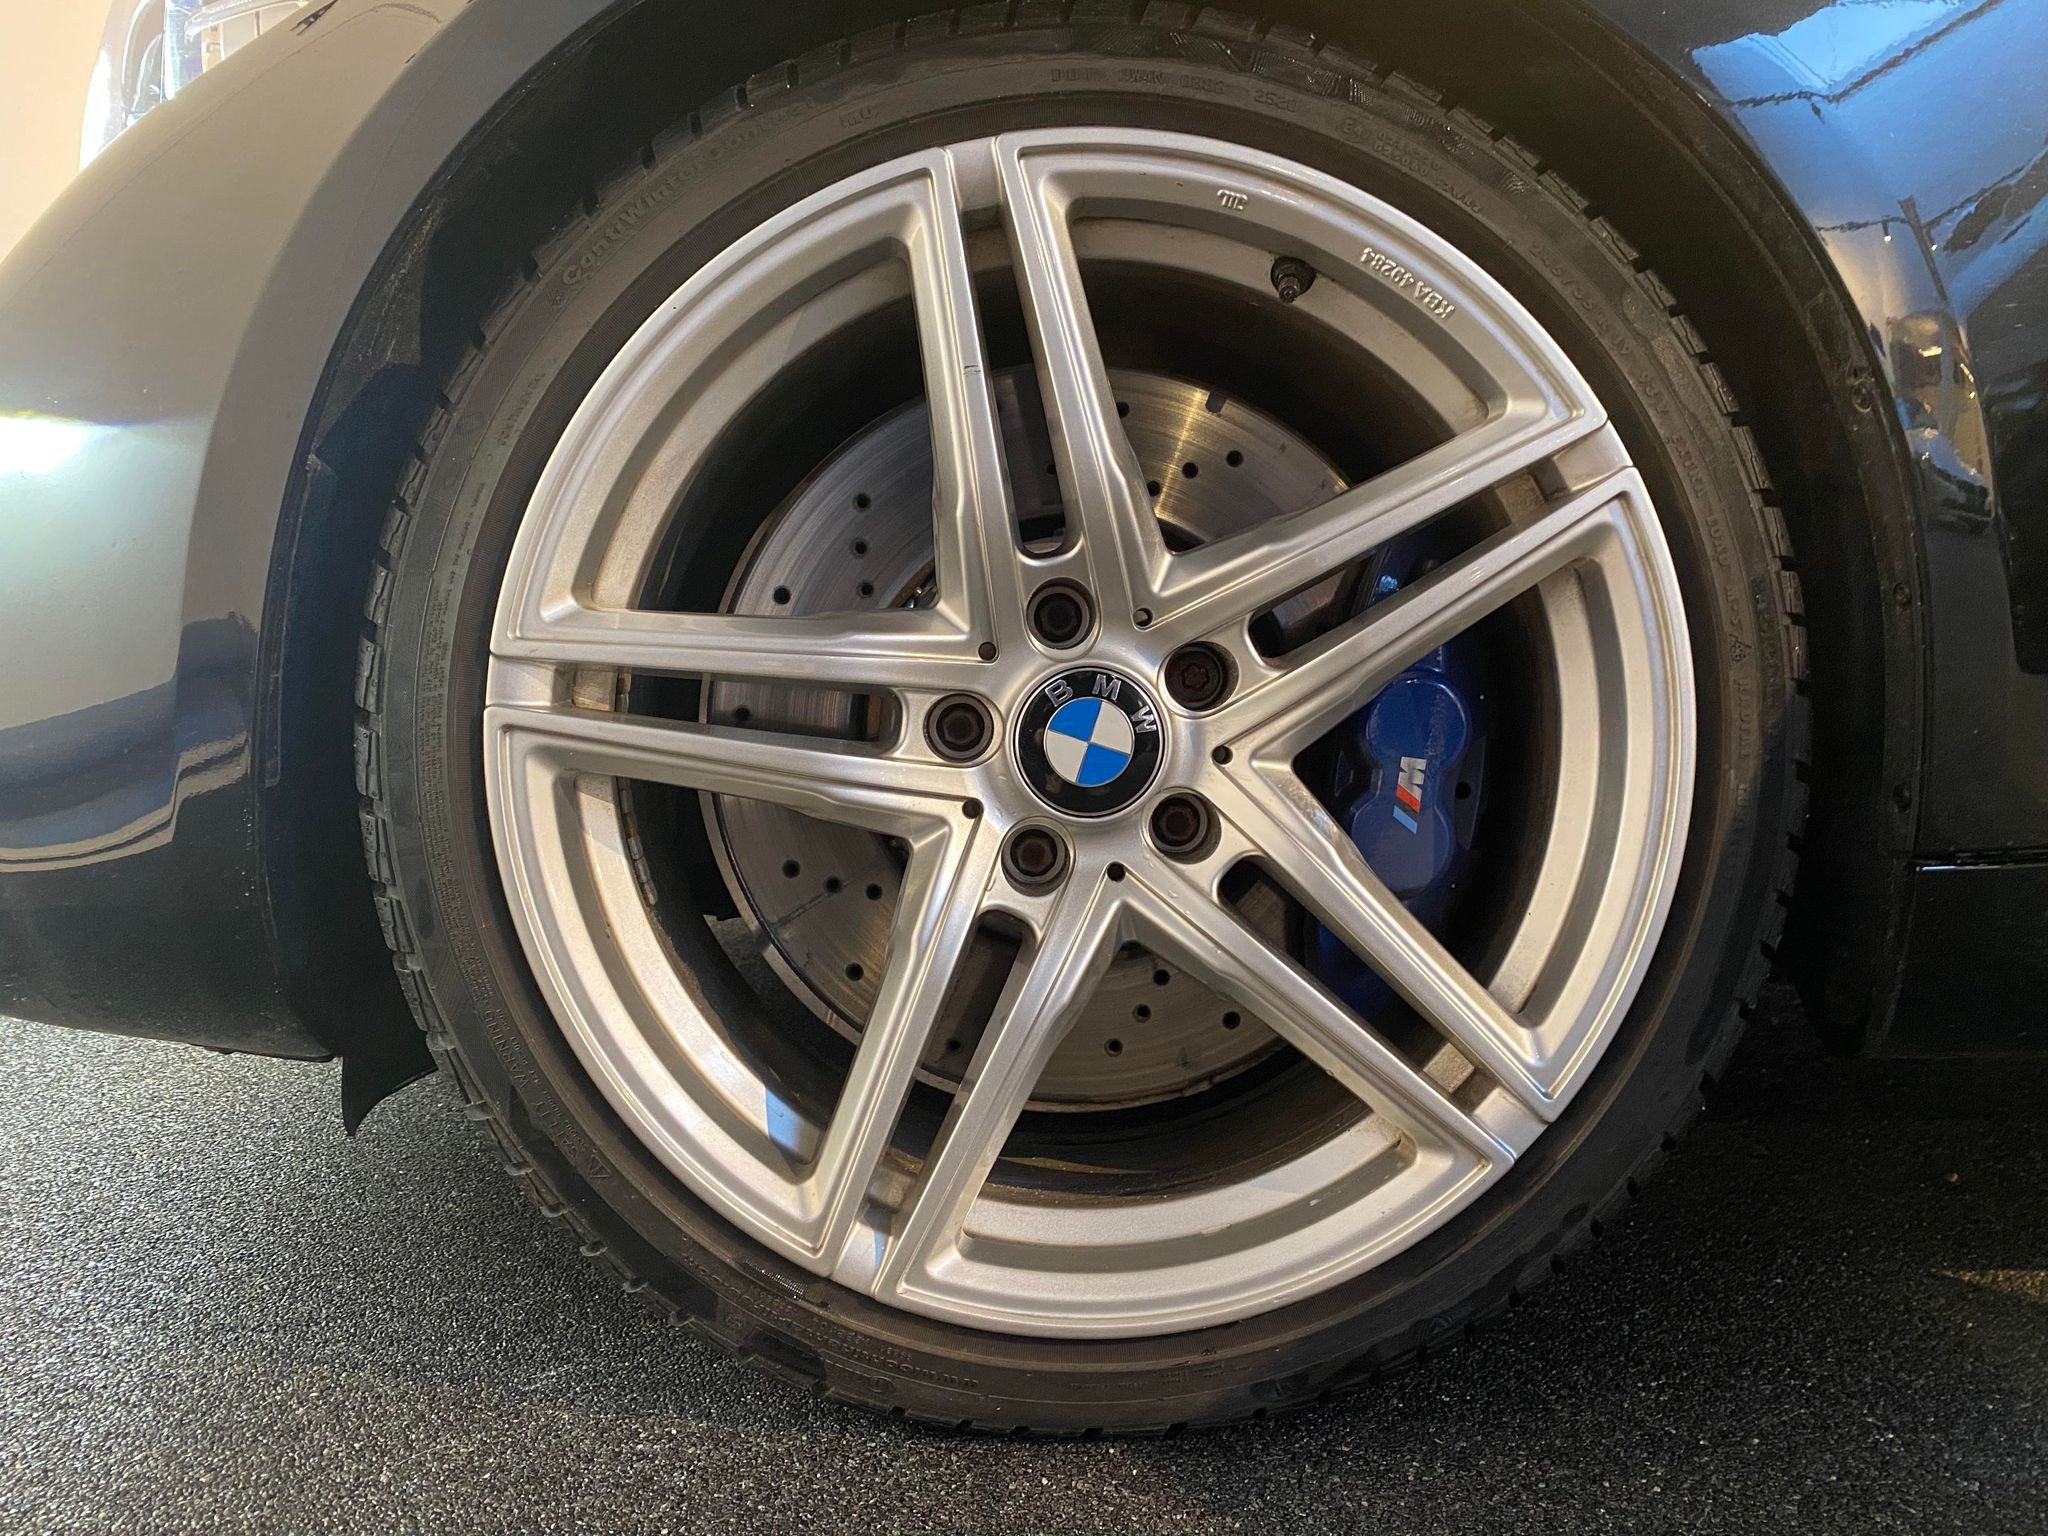 flexleasing-bmw-m2-30-370-hk-coupe-findleasing